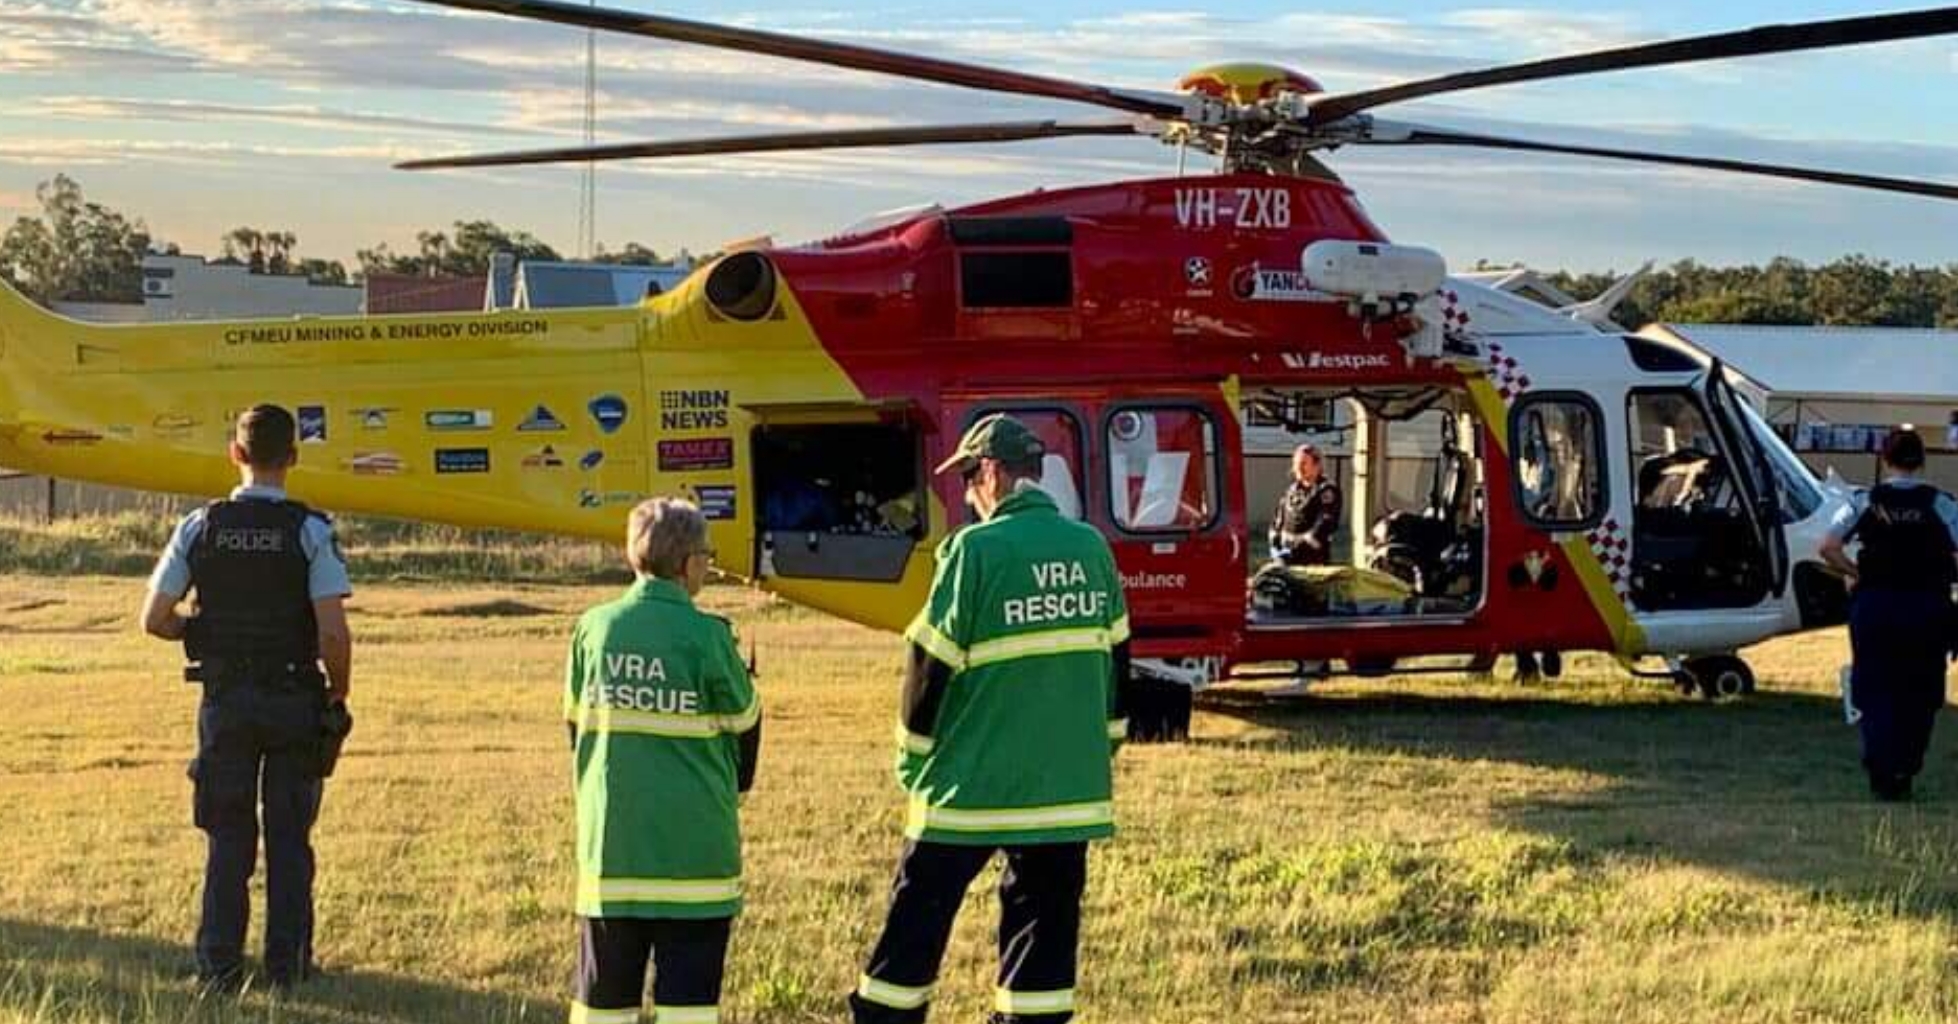 You are currently viewing MOTORCYCLIST AIR LIFTED TO JOHN HUNTER HOSPITAL AFTER CRASH NEAR CESSNOCK.